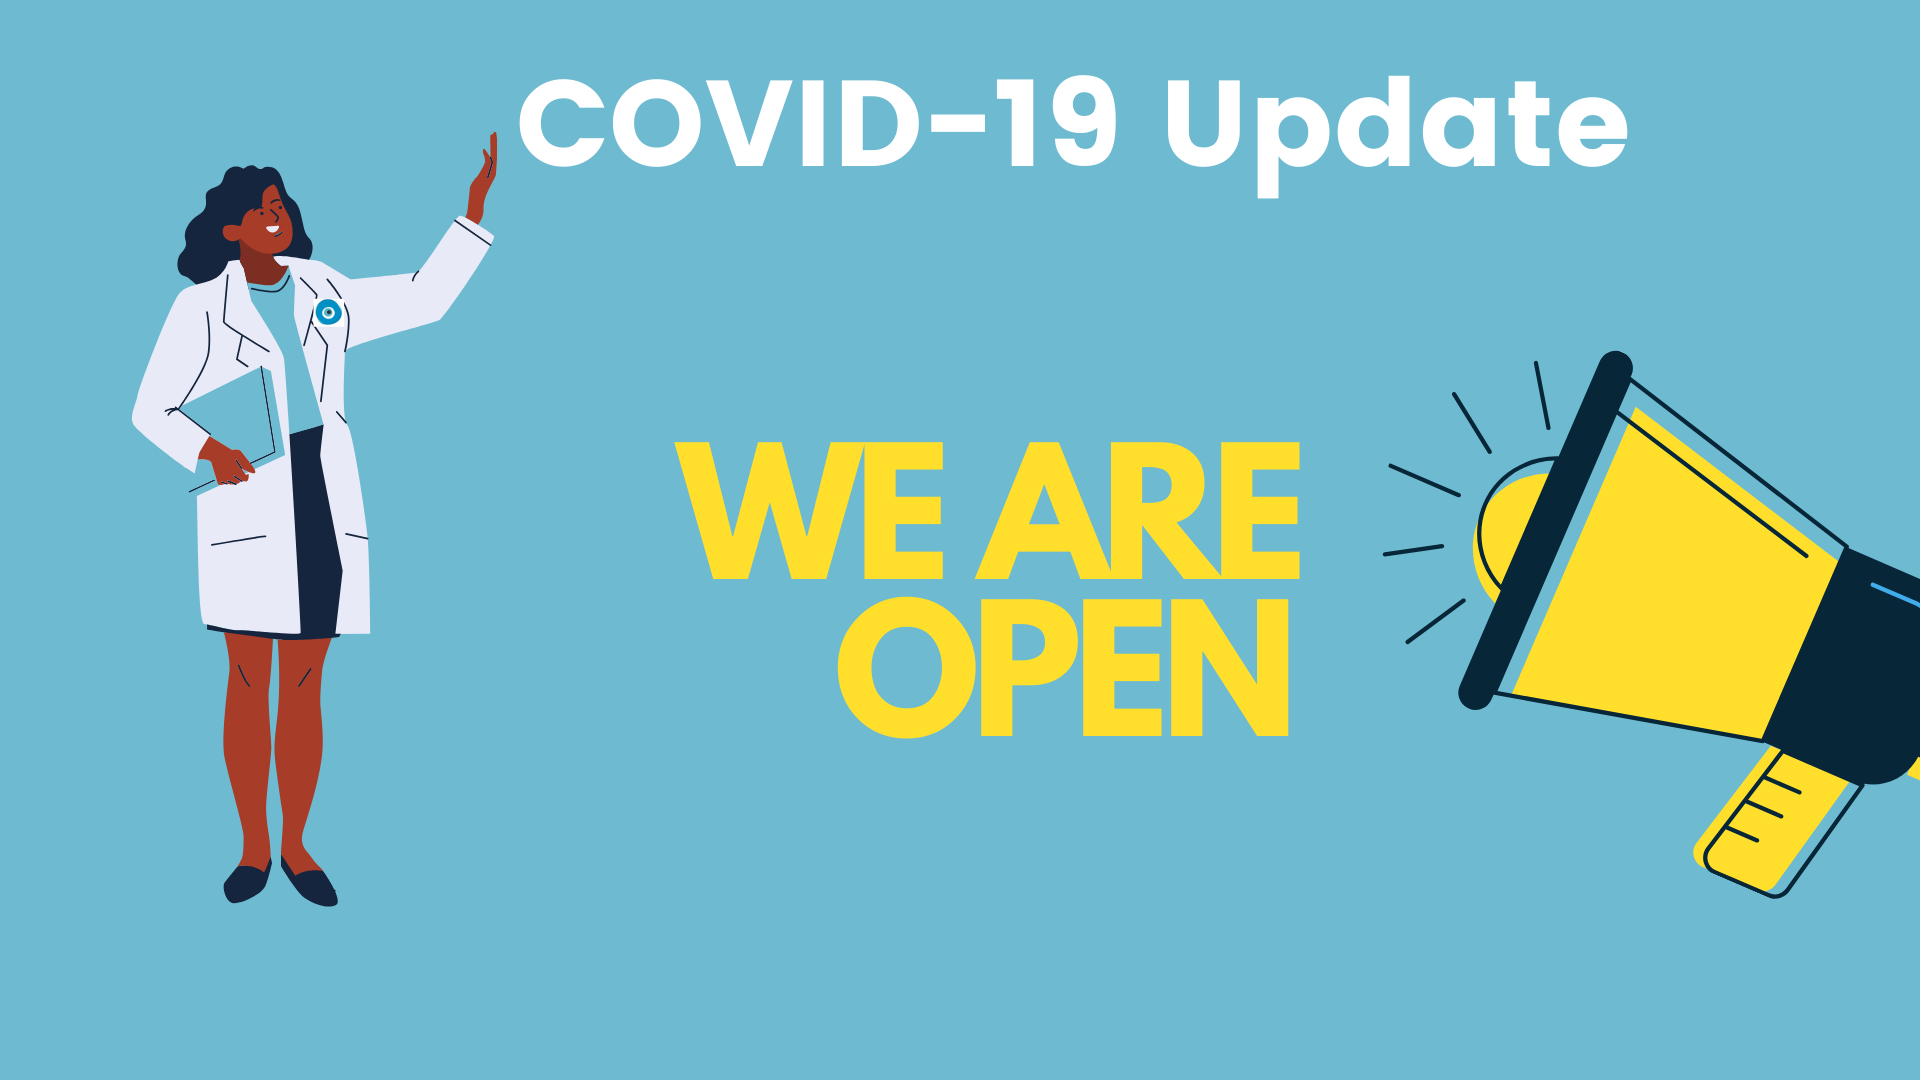 we are open covid 19 dimaco web infographic